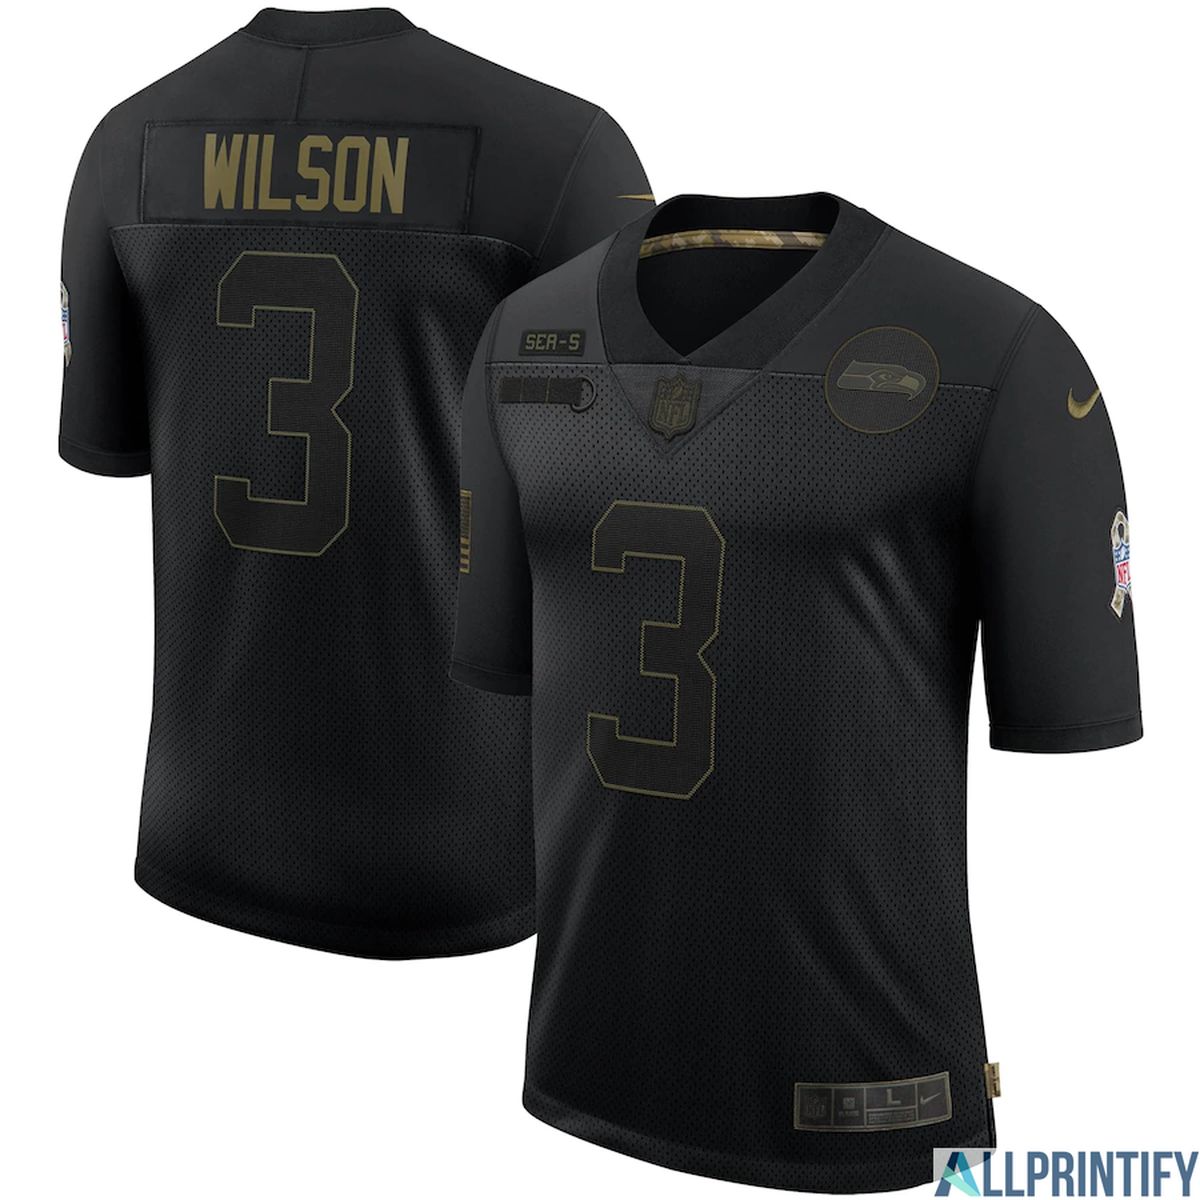 russell wilson jersey stitched